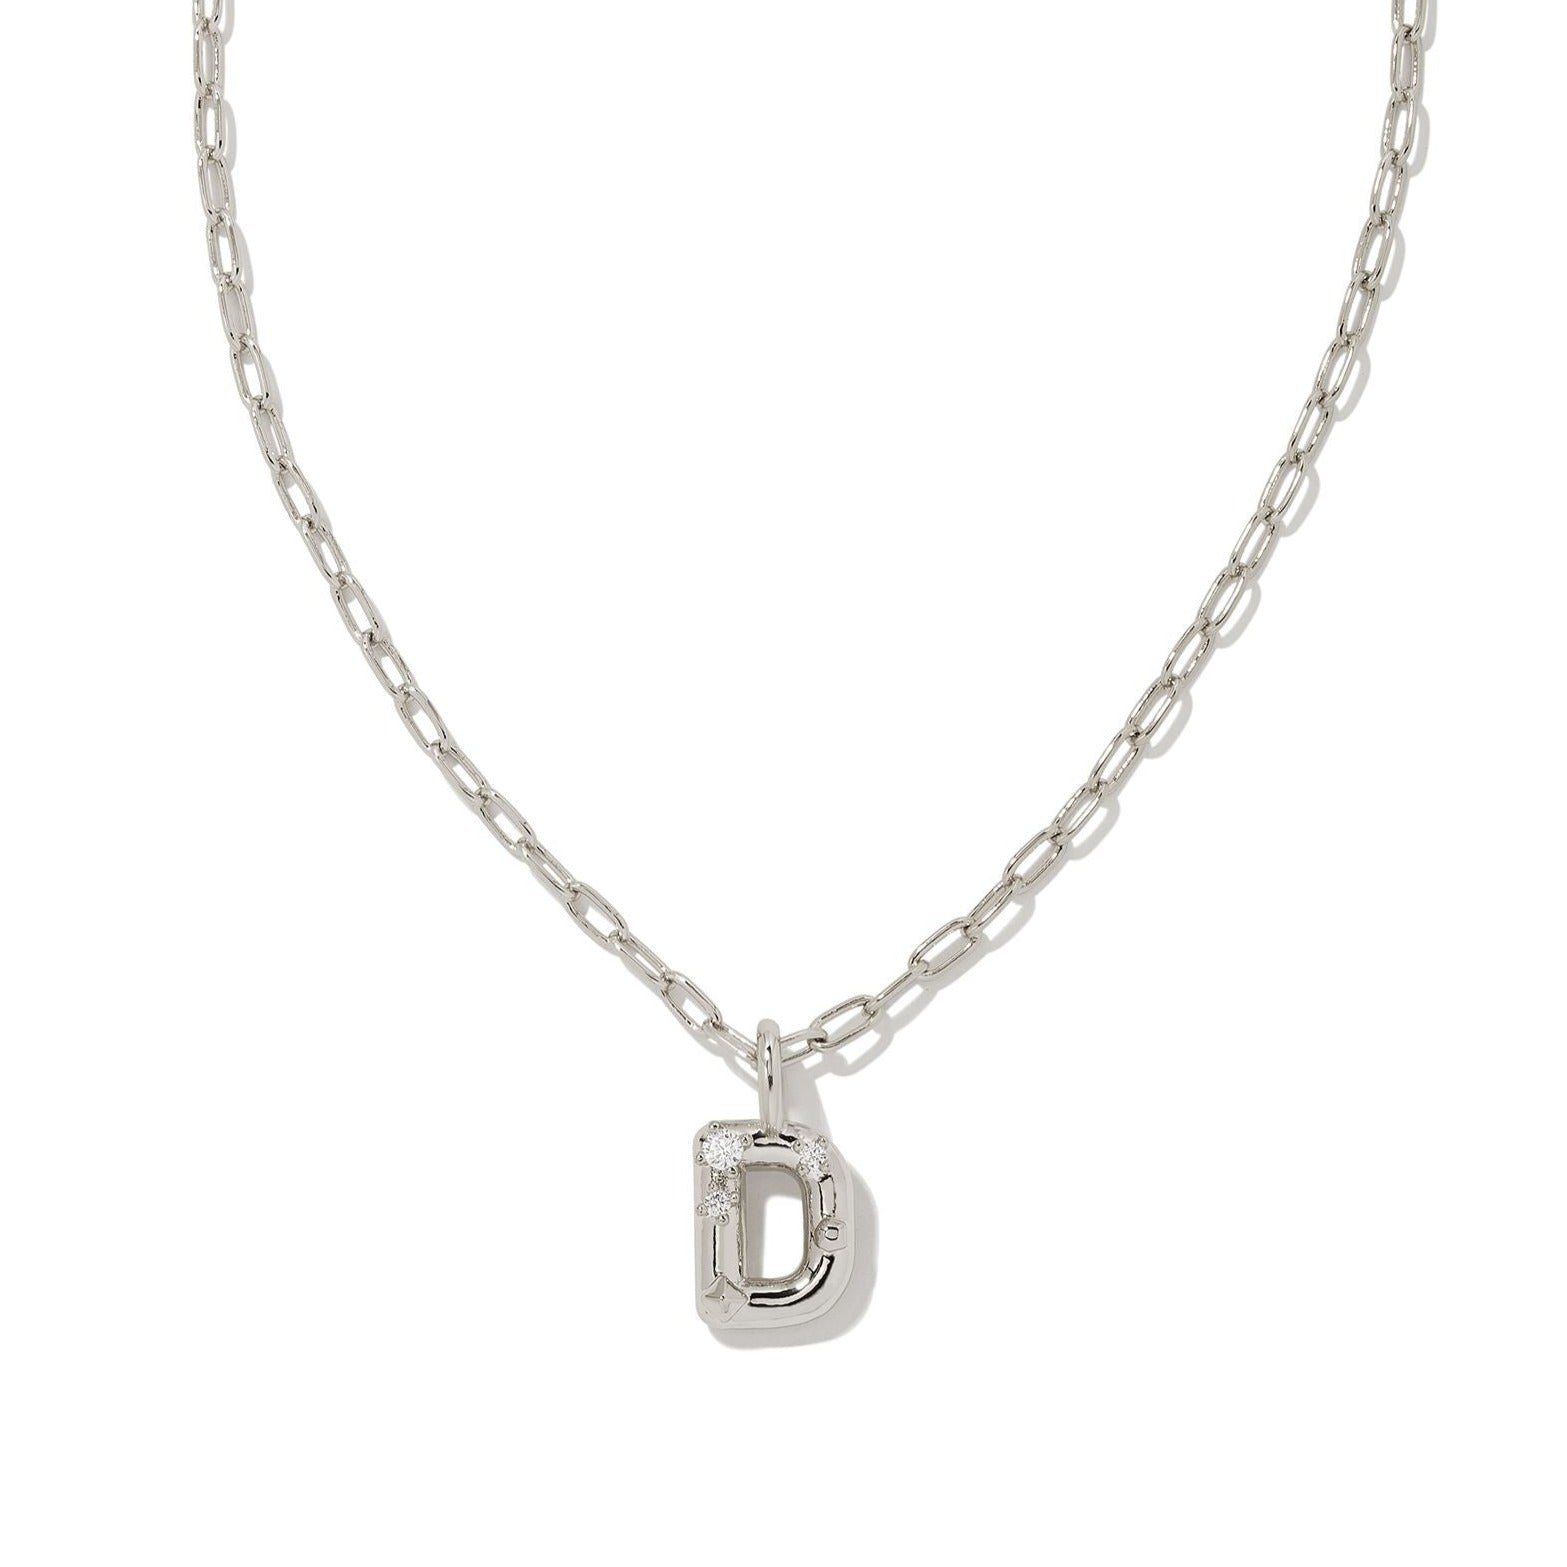 Kendra Scott | Crystal Letter Silver Short Pendant Necklace in White Crystal - Giddy Up Glamour Boutique